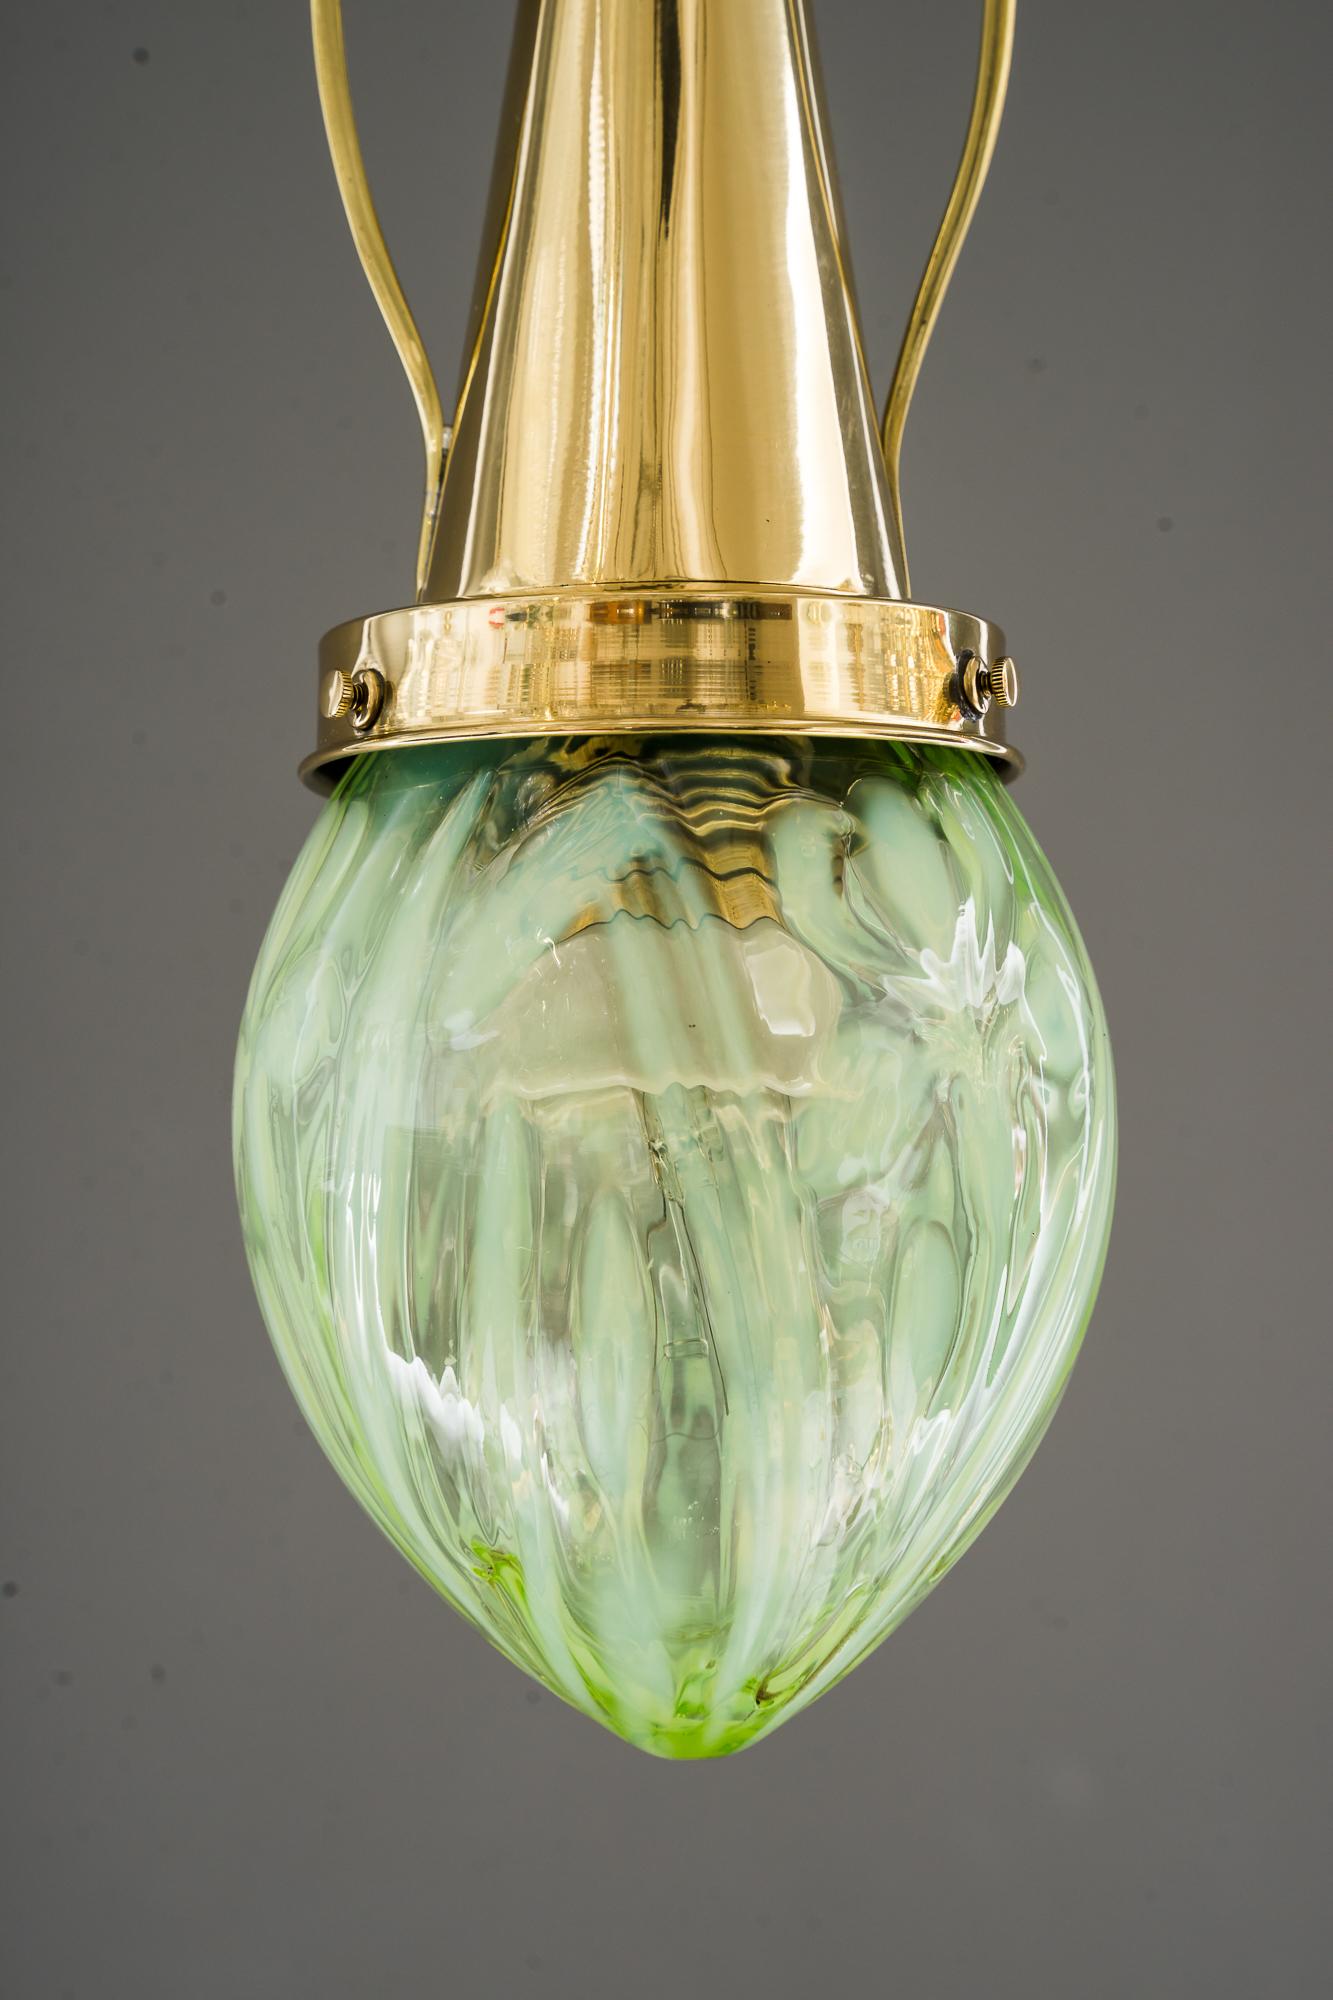 Small jugendstil pendant Vienna around 1910
Brass polished and stove enamelled
Original opaline glass shade
Wood on top painted.